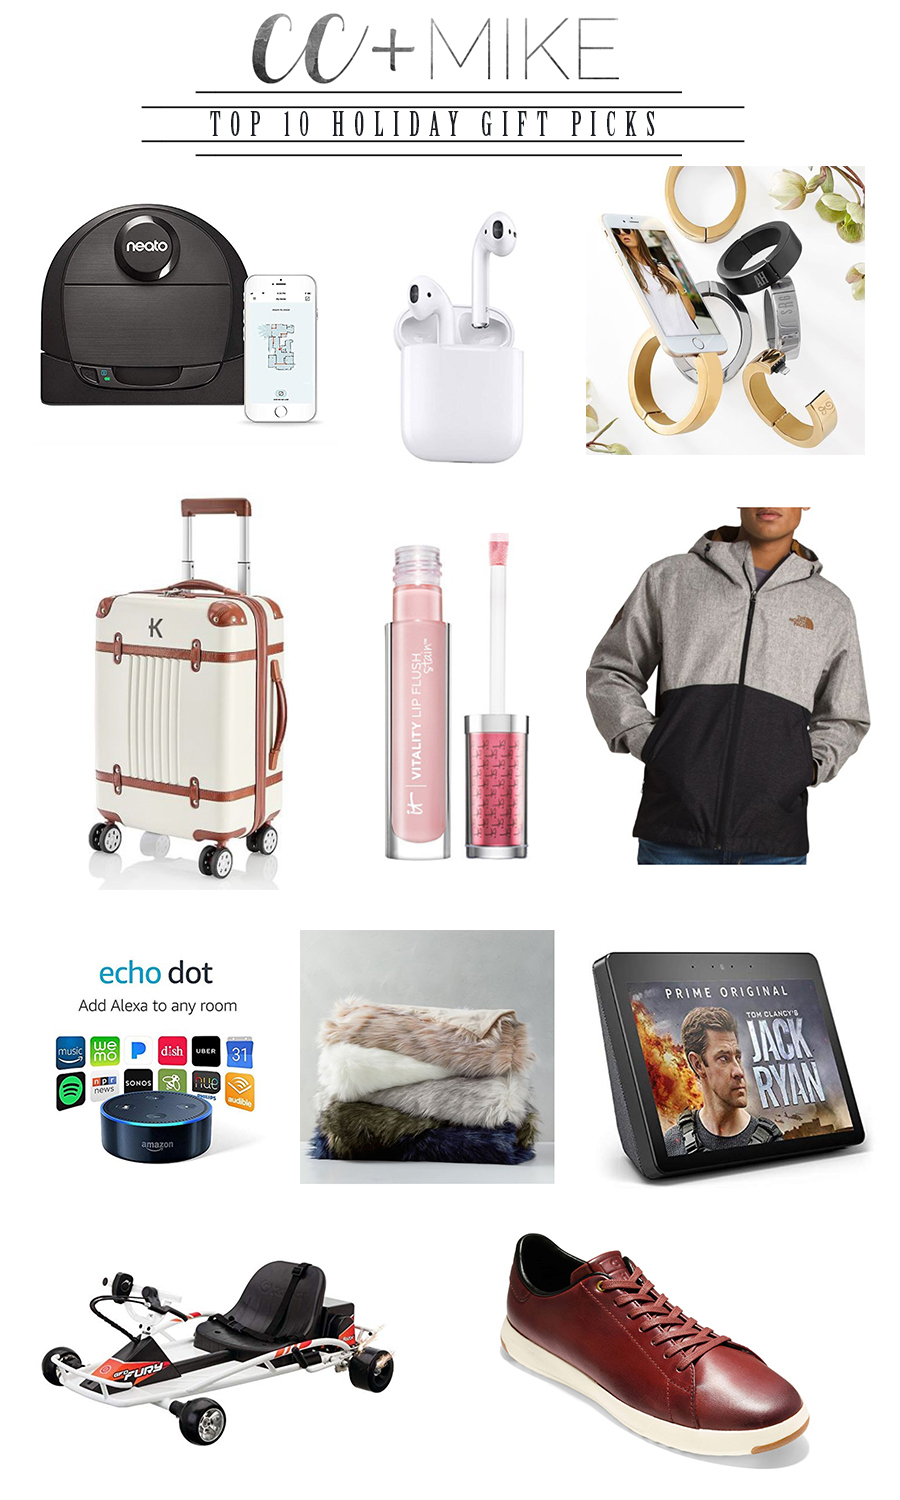 Christmas Gift Ideas for Women, cc+mike